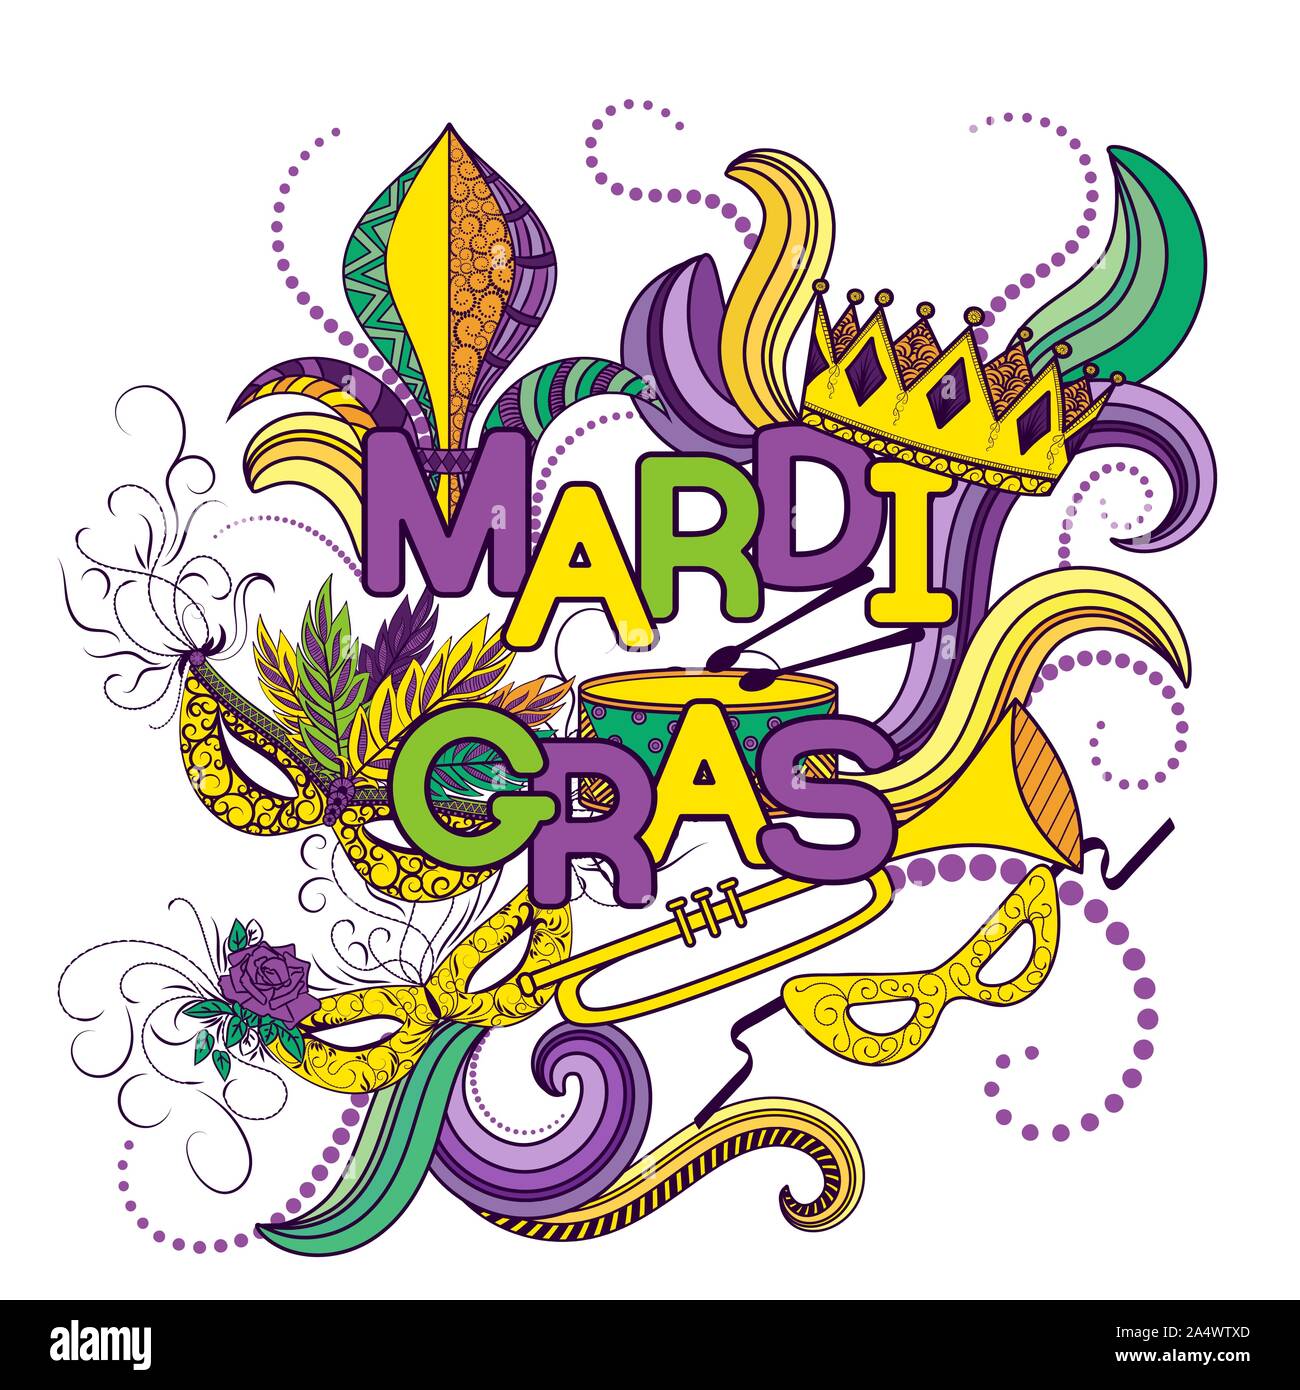 Card With Feathers In Mardi Gras Colors Stock Illustration